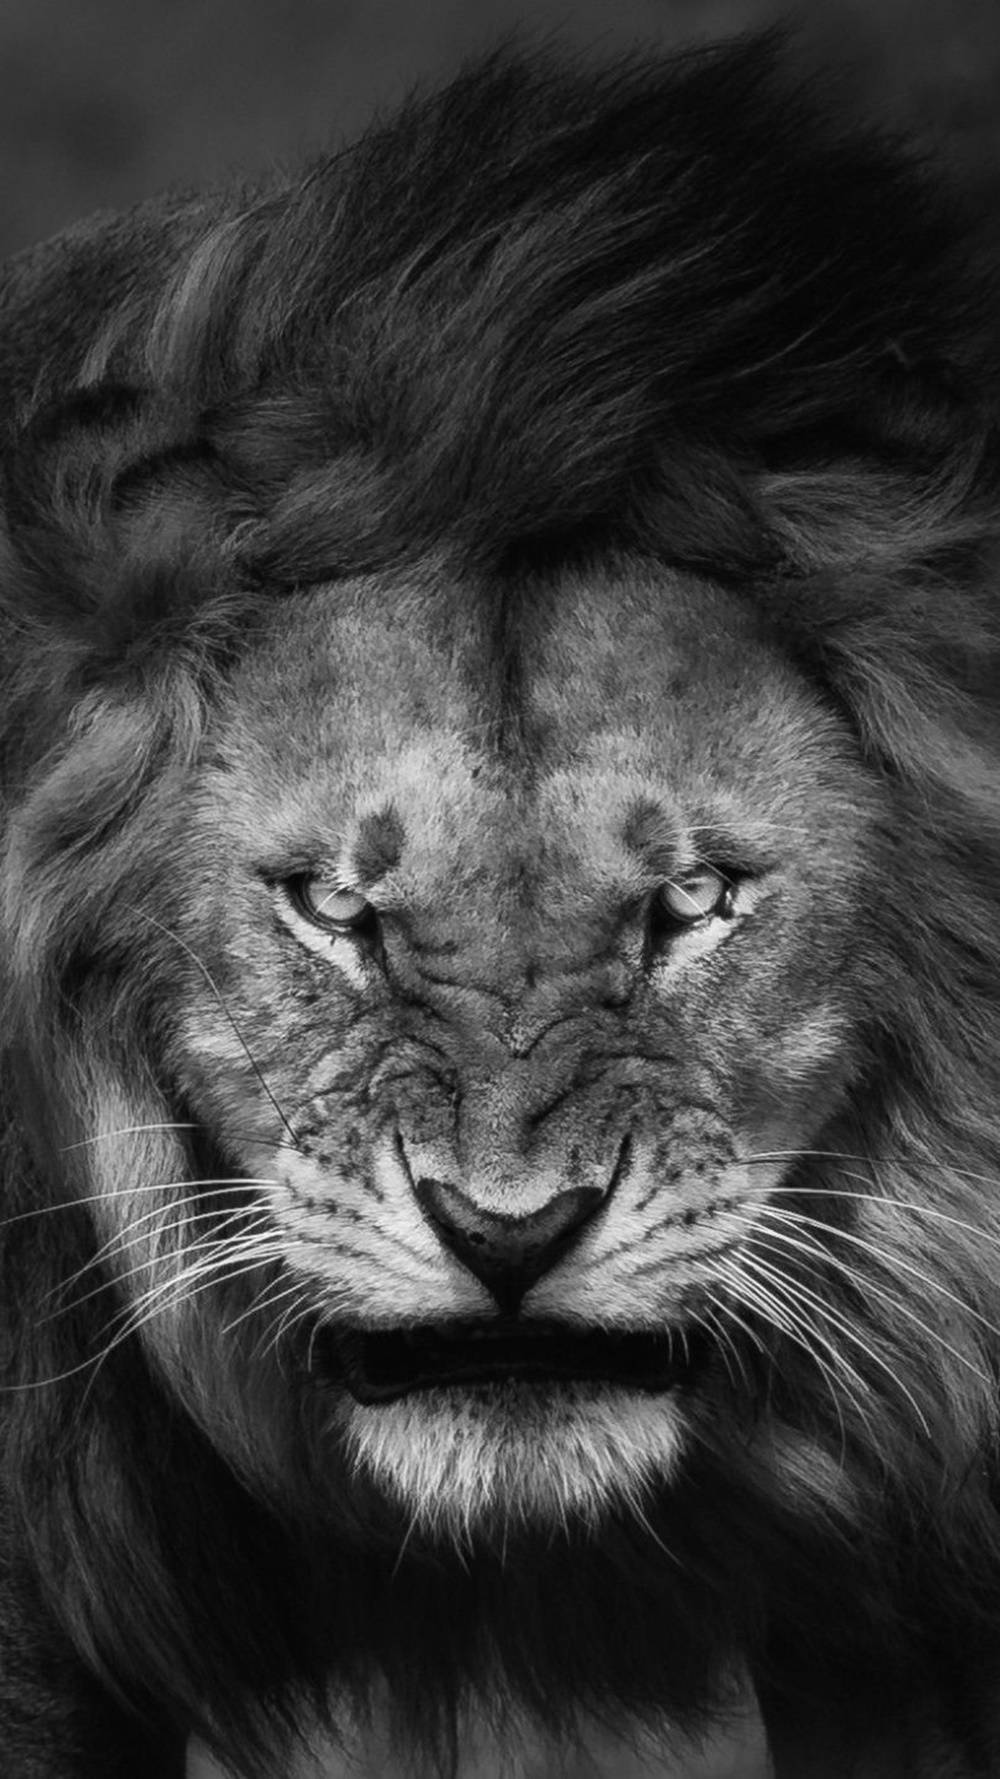 Majestic Lion Roaring On Iphone Wallpaper Background